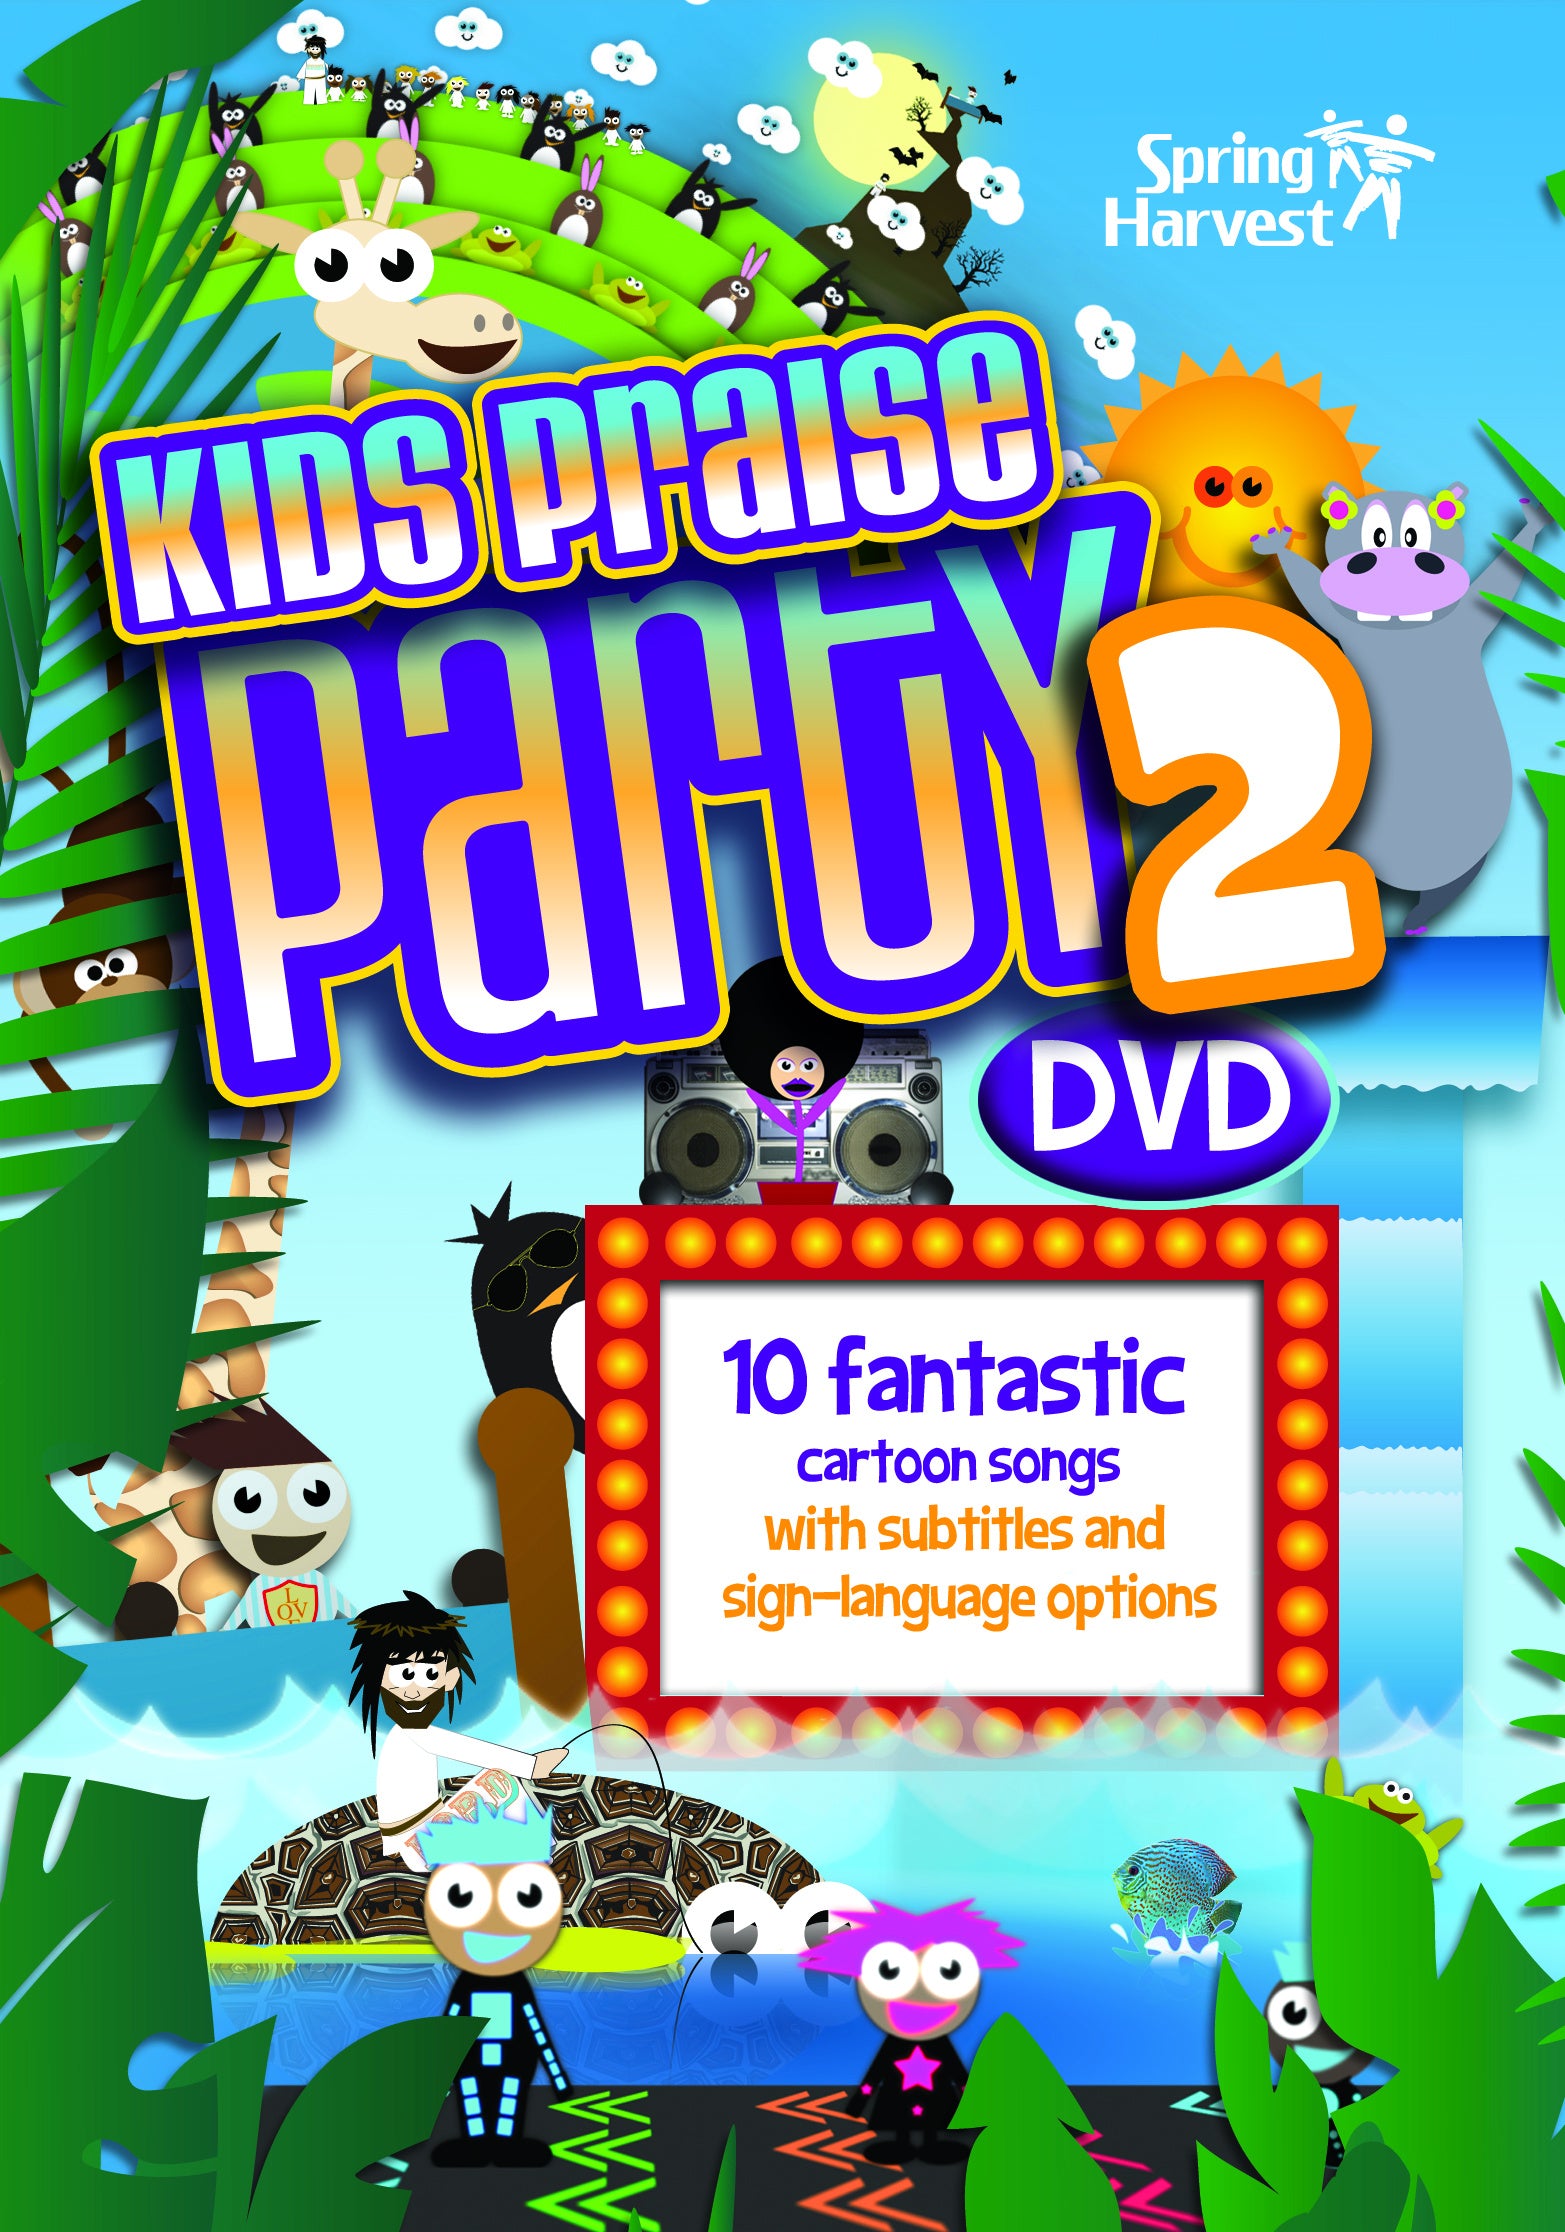 Image of Kids Praise Party 2 DVD other